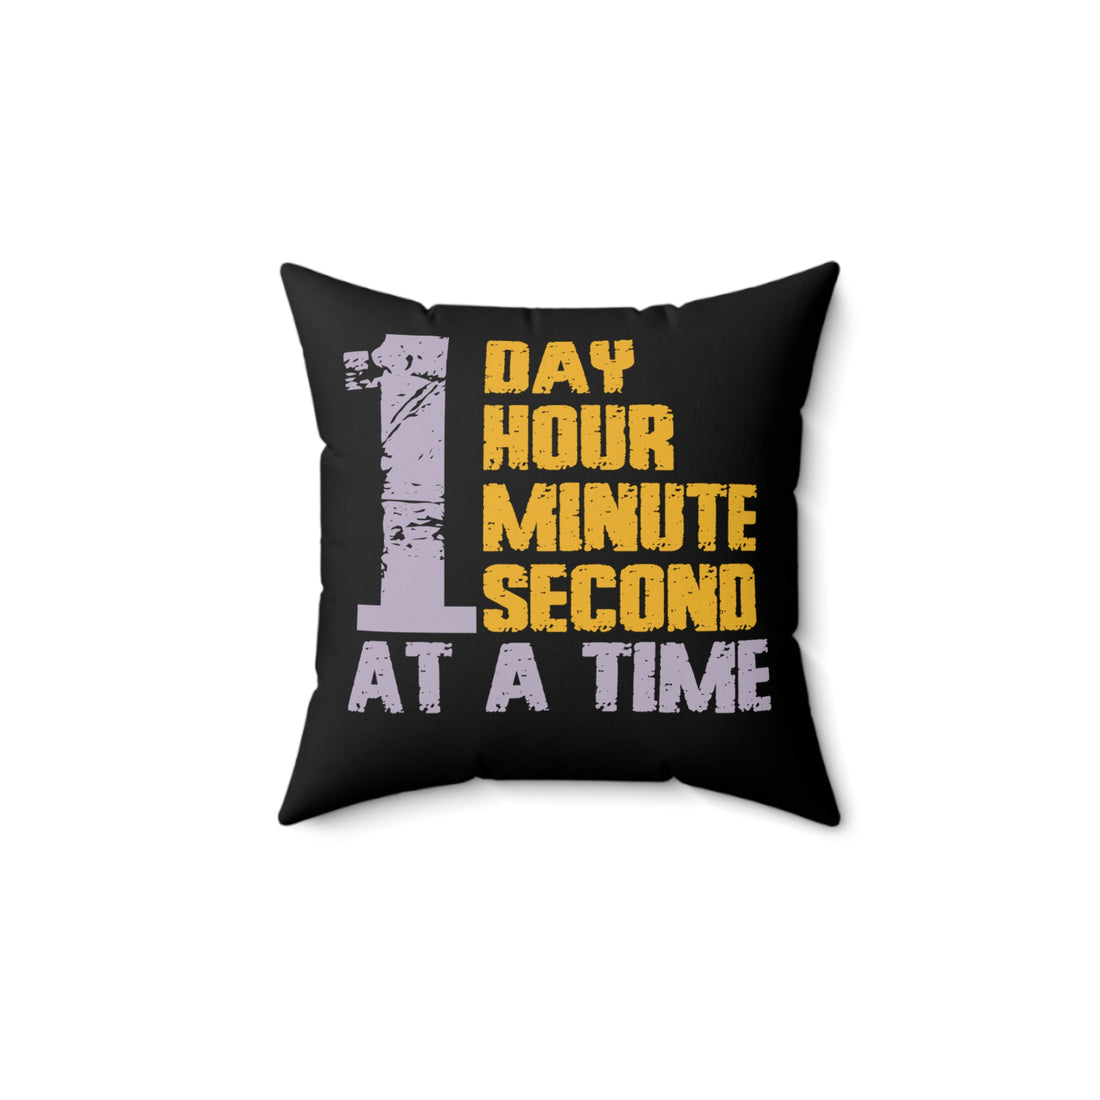 1 Day Hour Minute Second At A Time -  Black Pillow